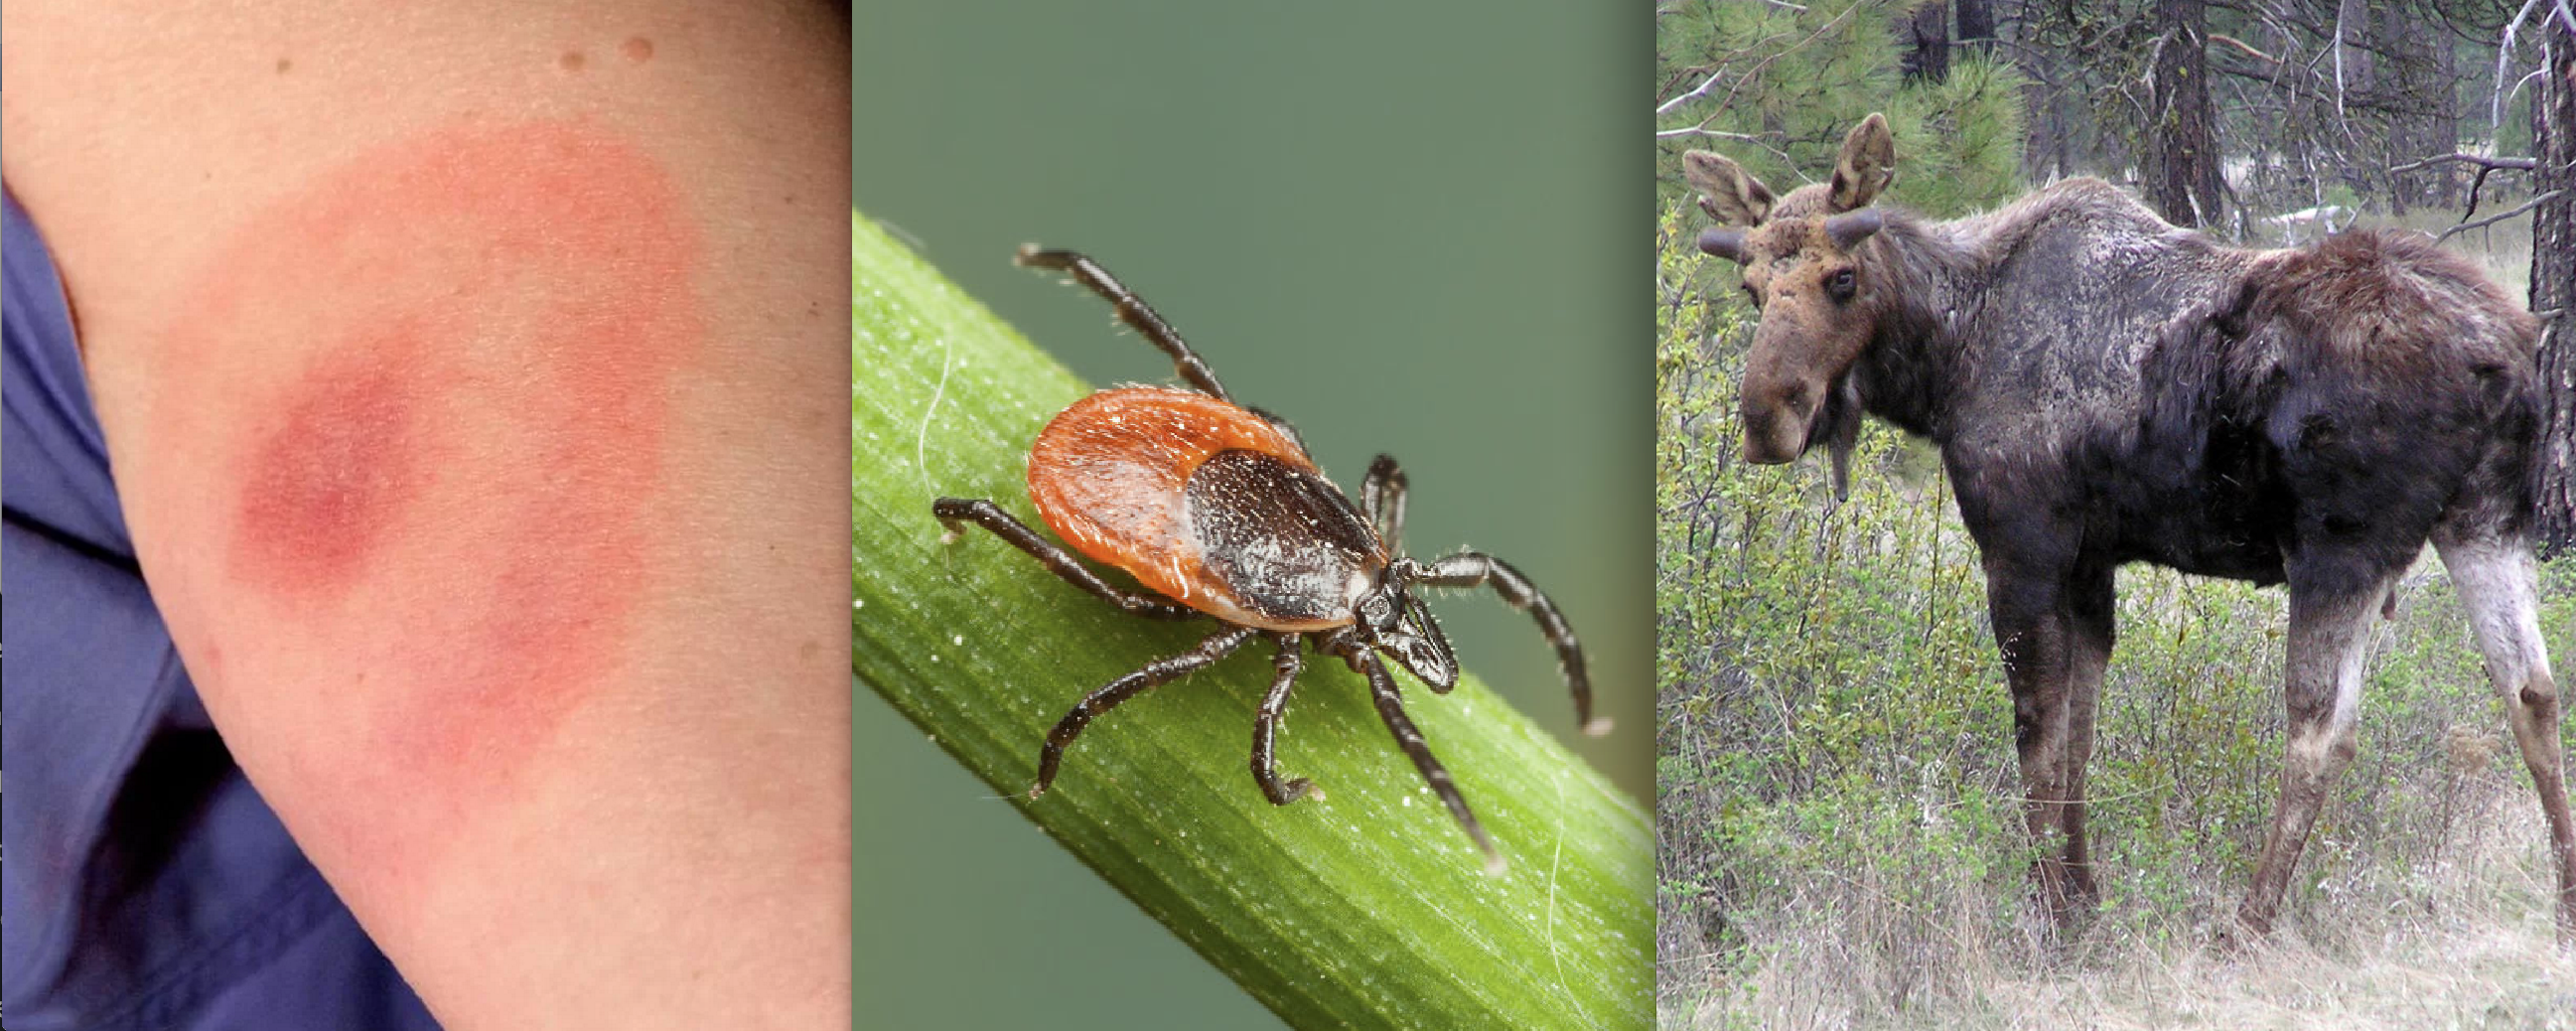 Explosion of Deadly Ticks Fueled by Climate Change, Ravaging Moose, Infecting People and Pets